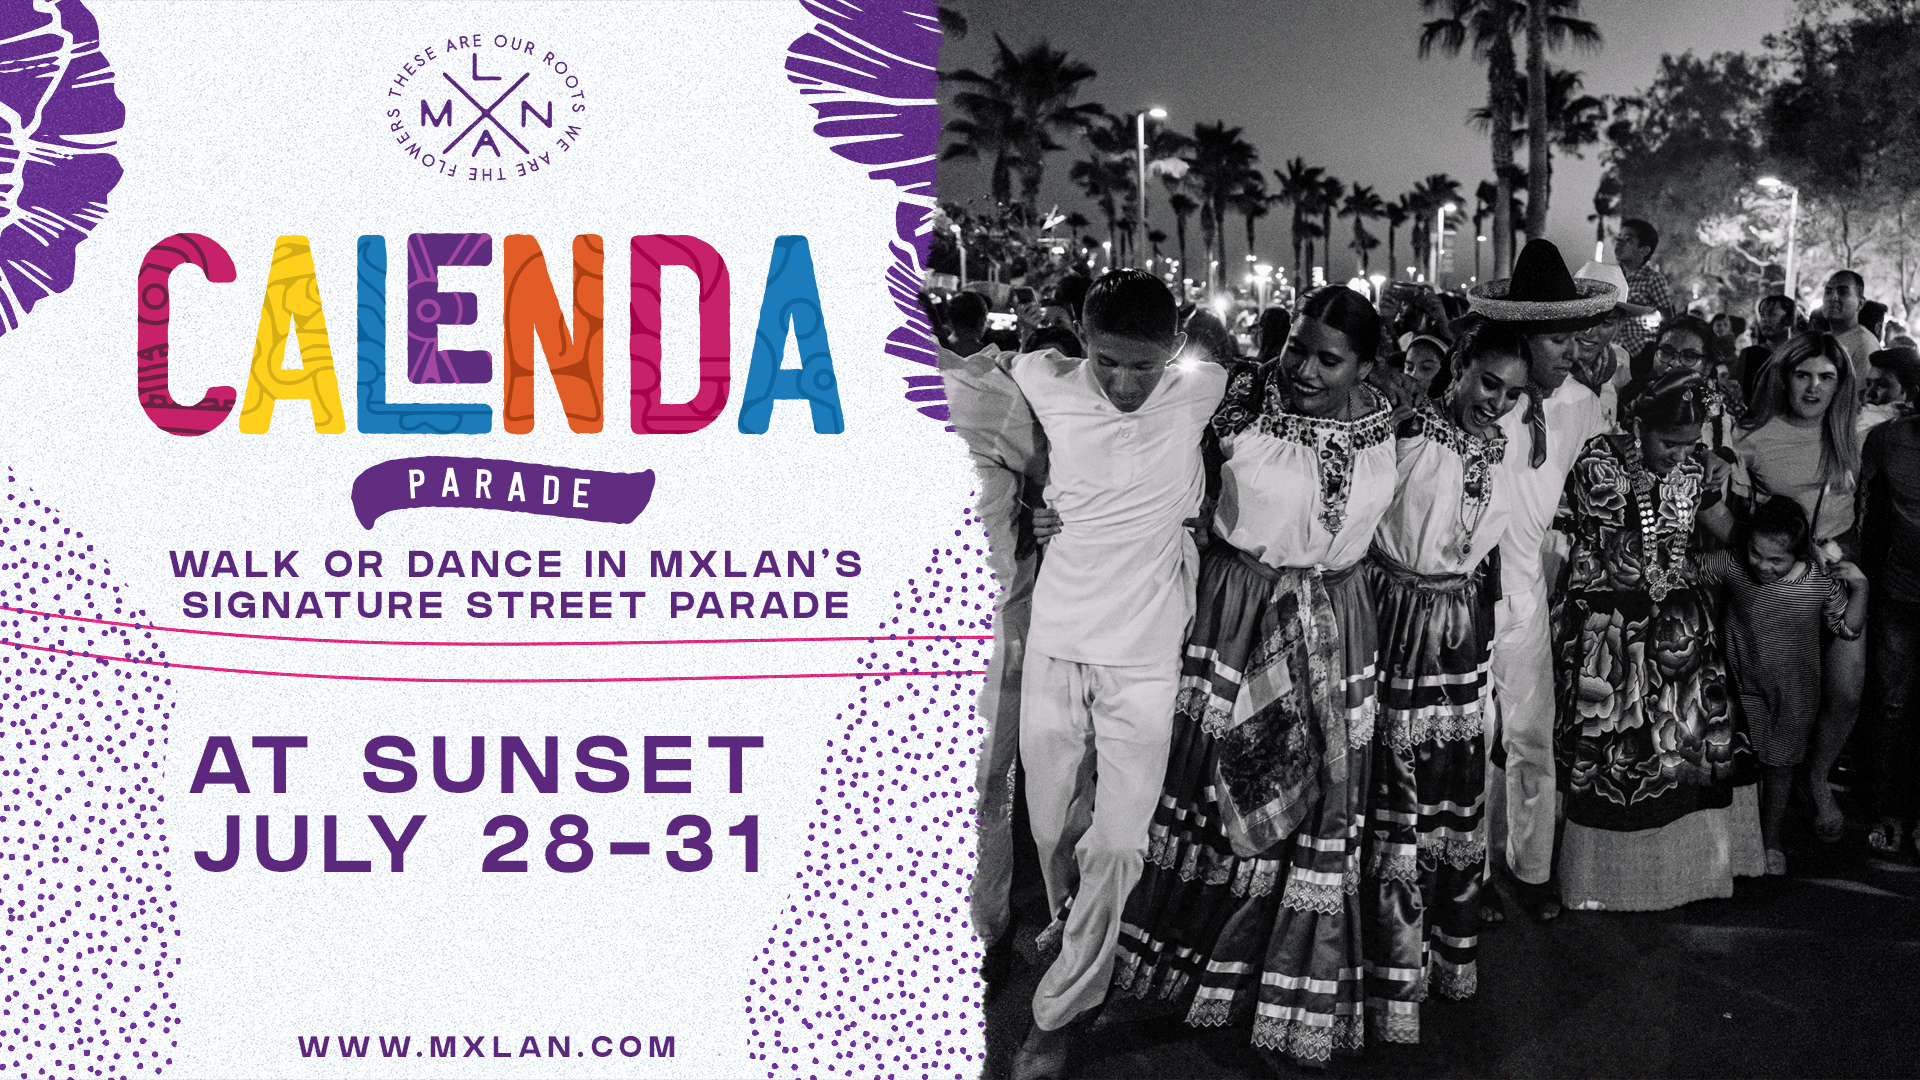 mxlan festival calenda mcallen latino latinx music arts best fesitval in texas acl south by south west coachella rio grande valley south padre island brownsville indie best latino festival in us breakthrough stage